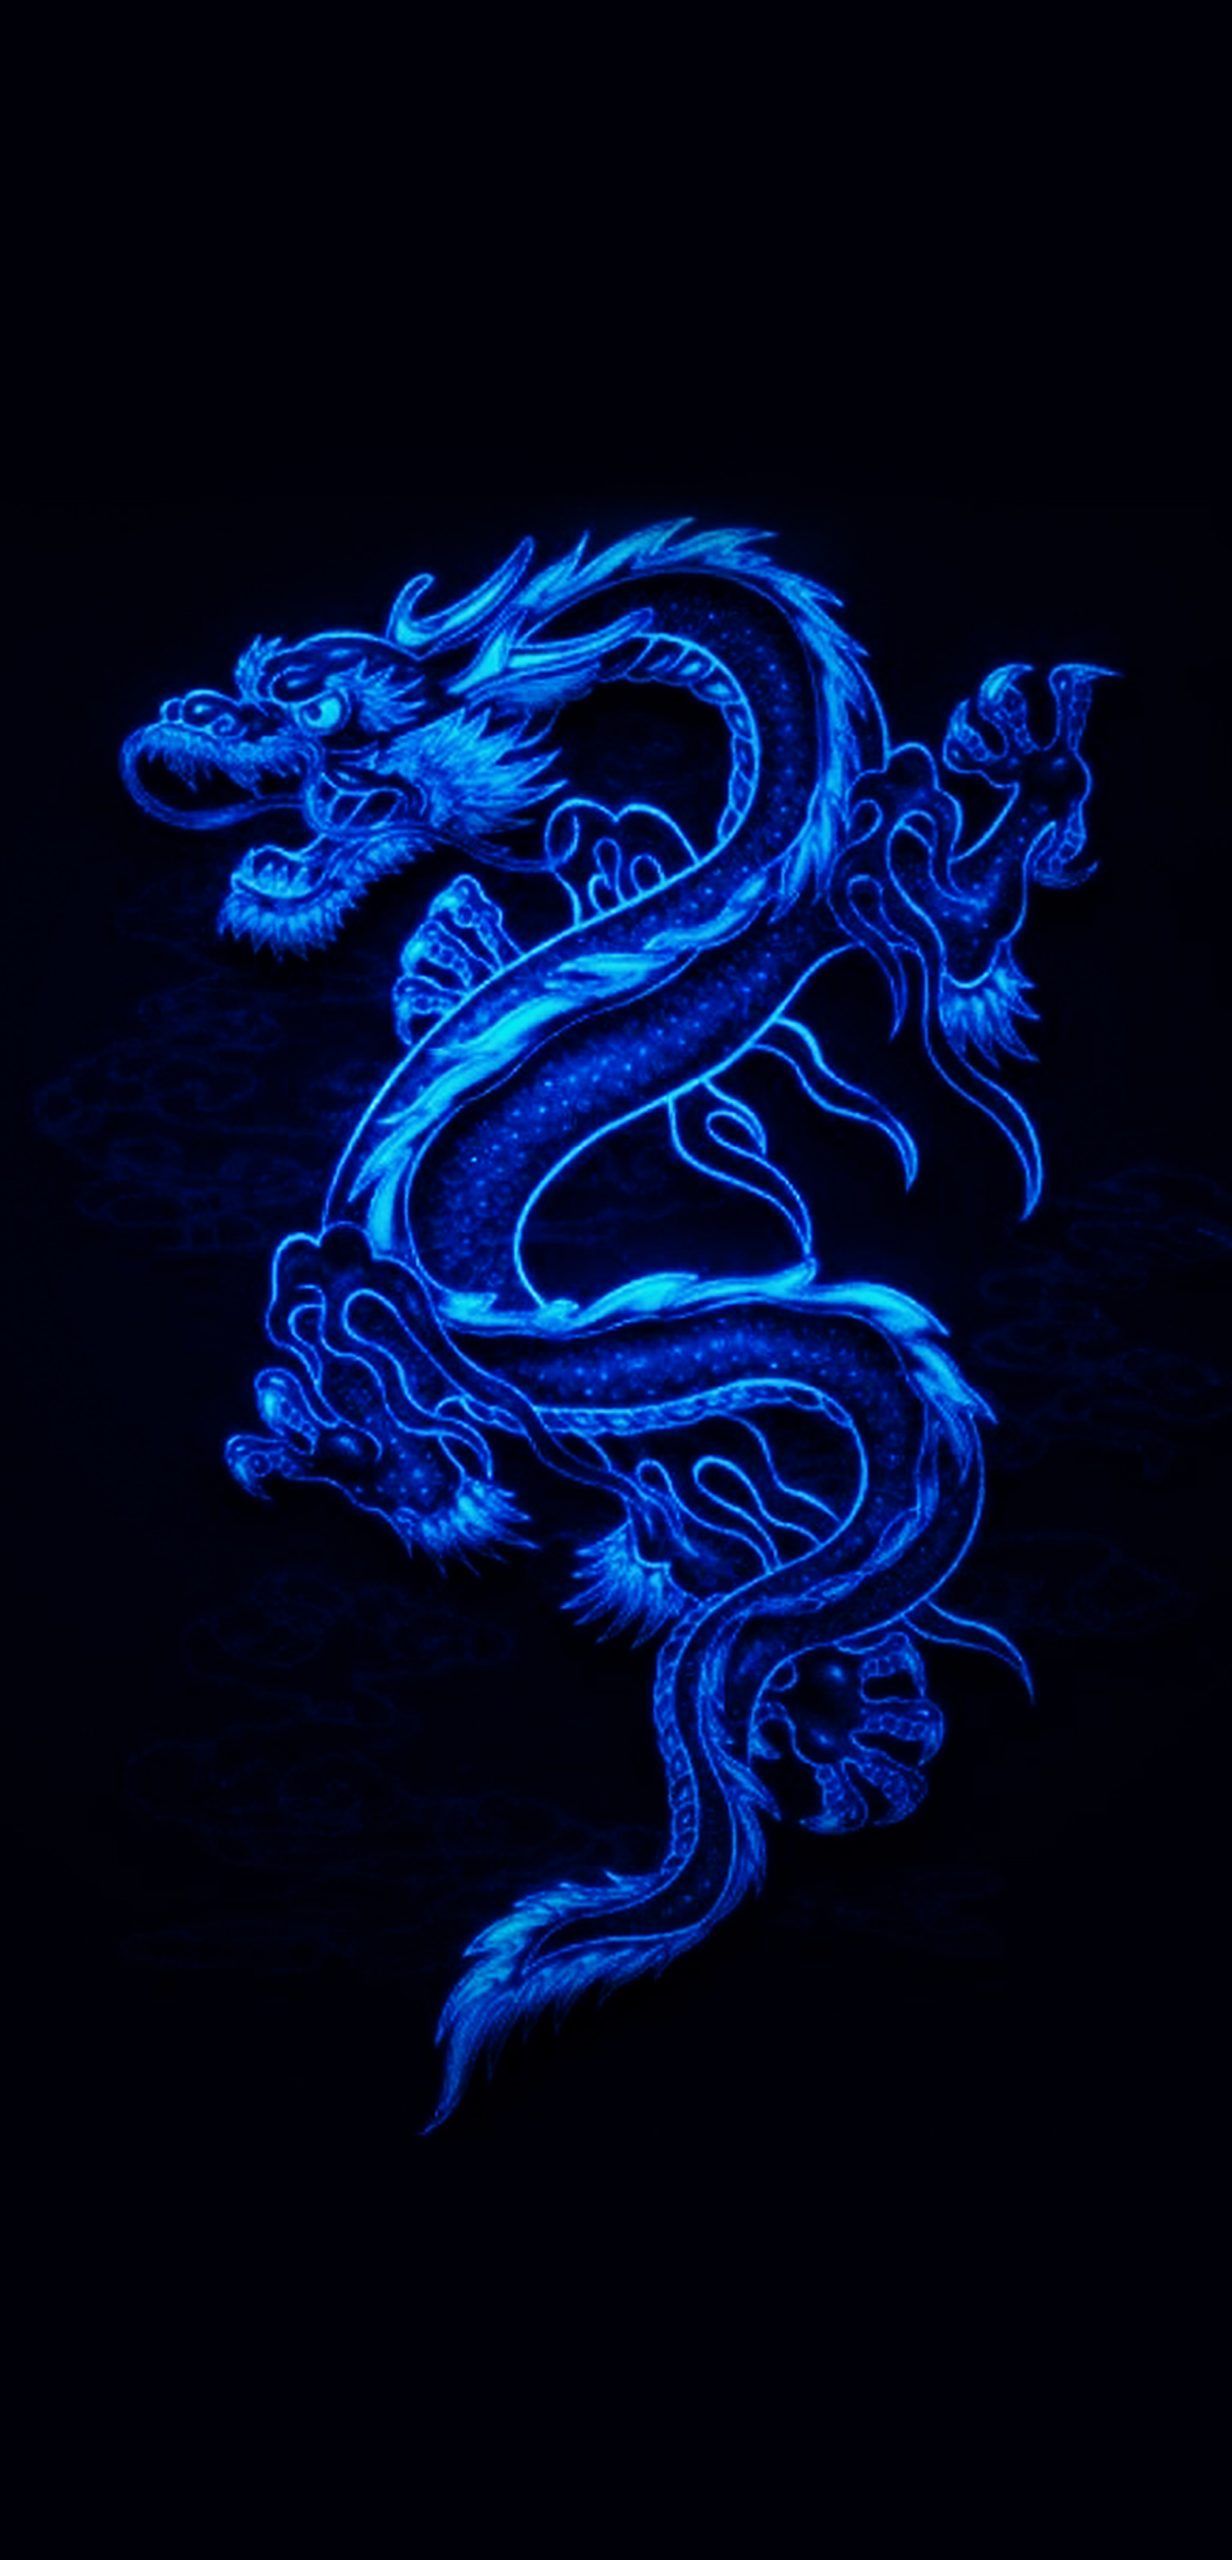 Best Wallpaper for Huawei Mate 40 Pro 05 Blue Dragon Wallpaper. Wallpaper Download. High Resolution Wallpaper